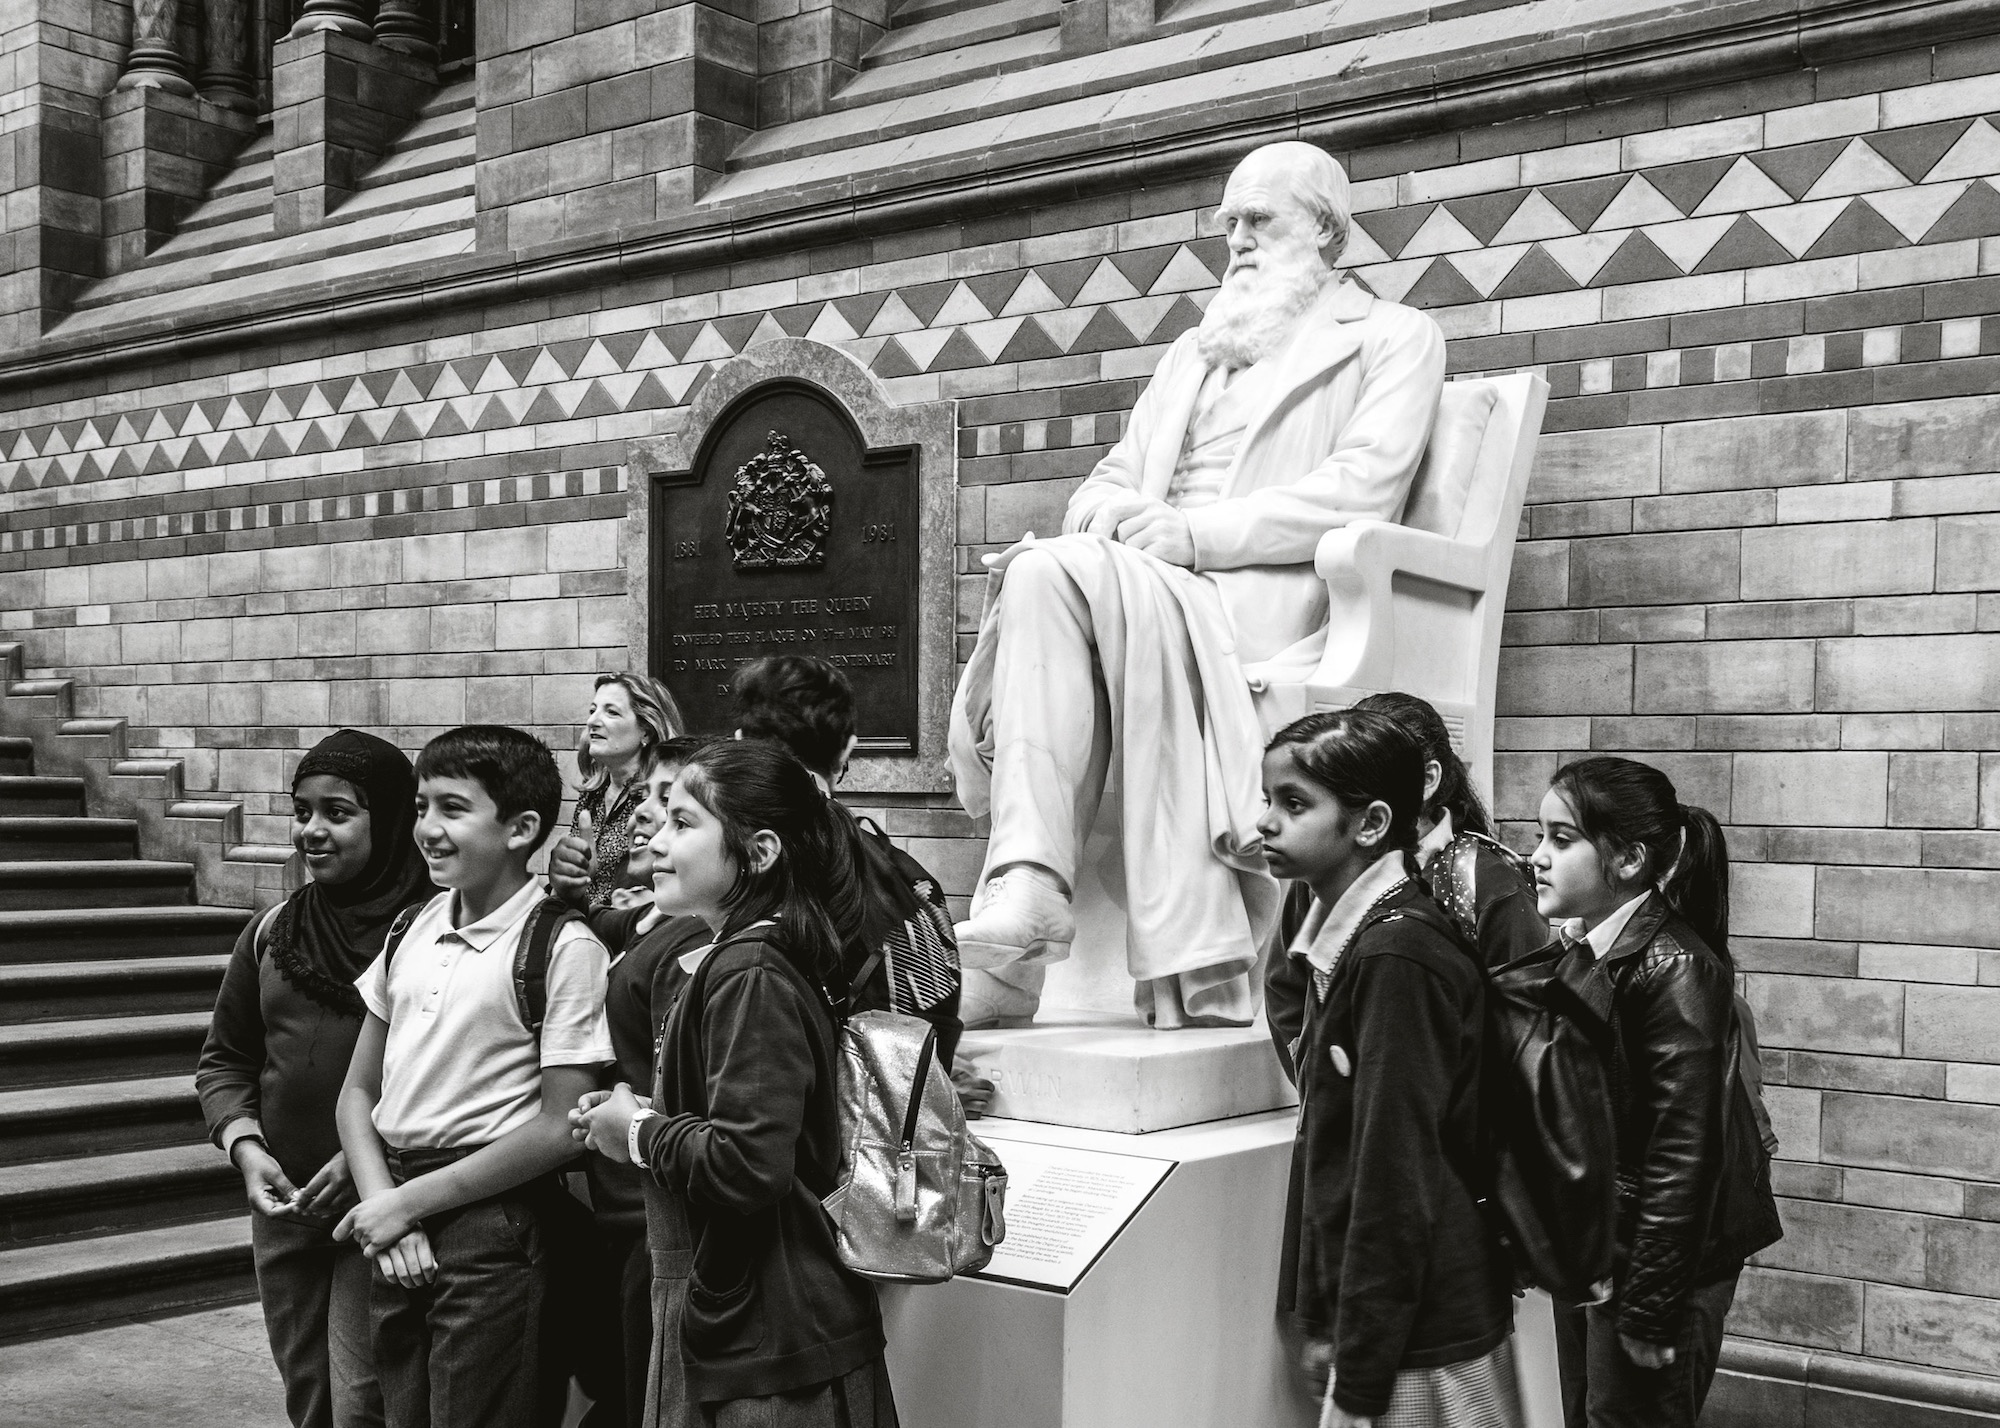 Schoolchildren on a school trip, posing for a photograph in front of the Charles Darwin statue, at the Natural History Museum, London, England, UK.